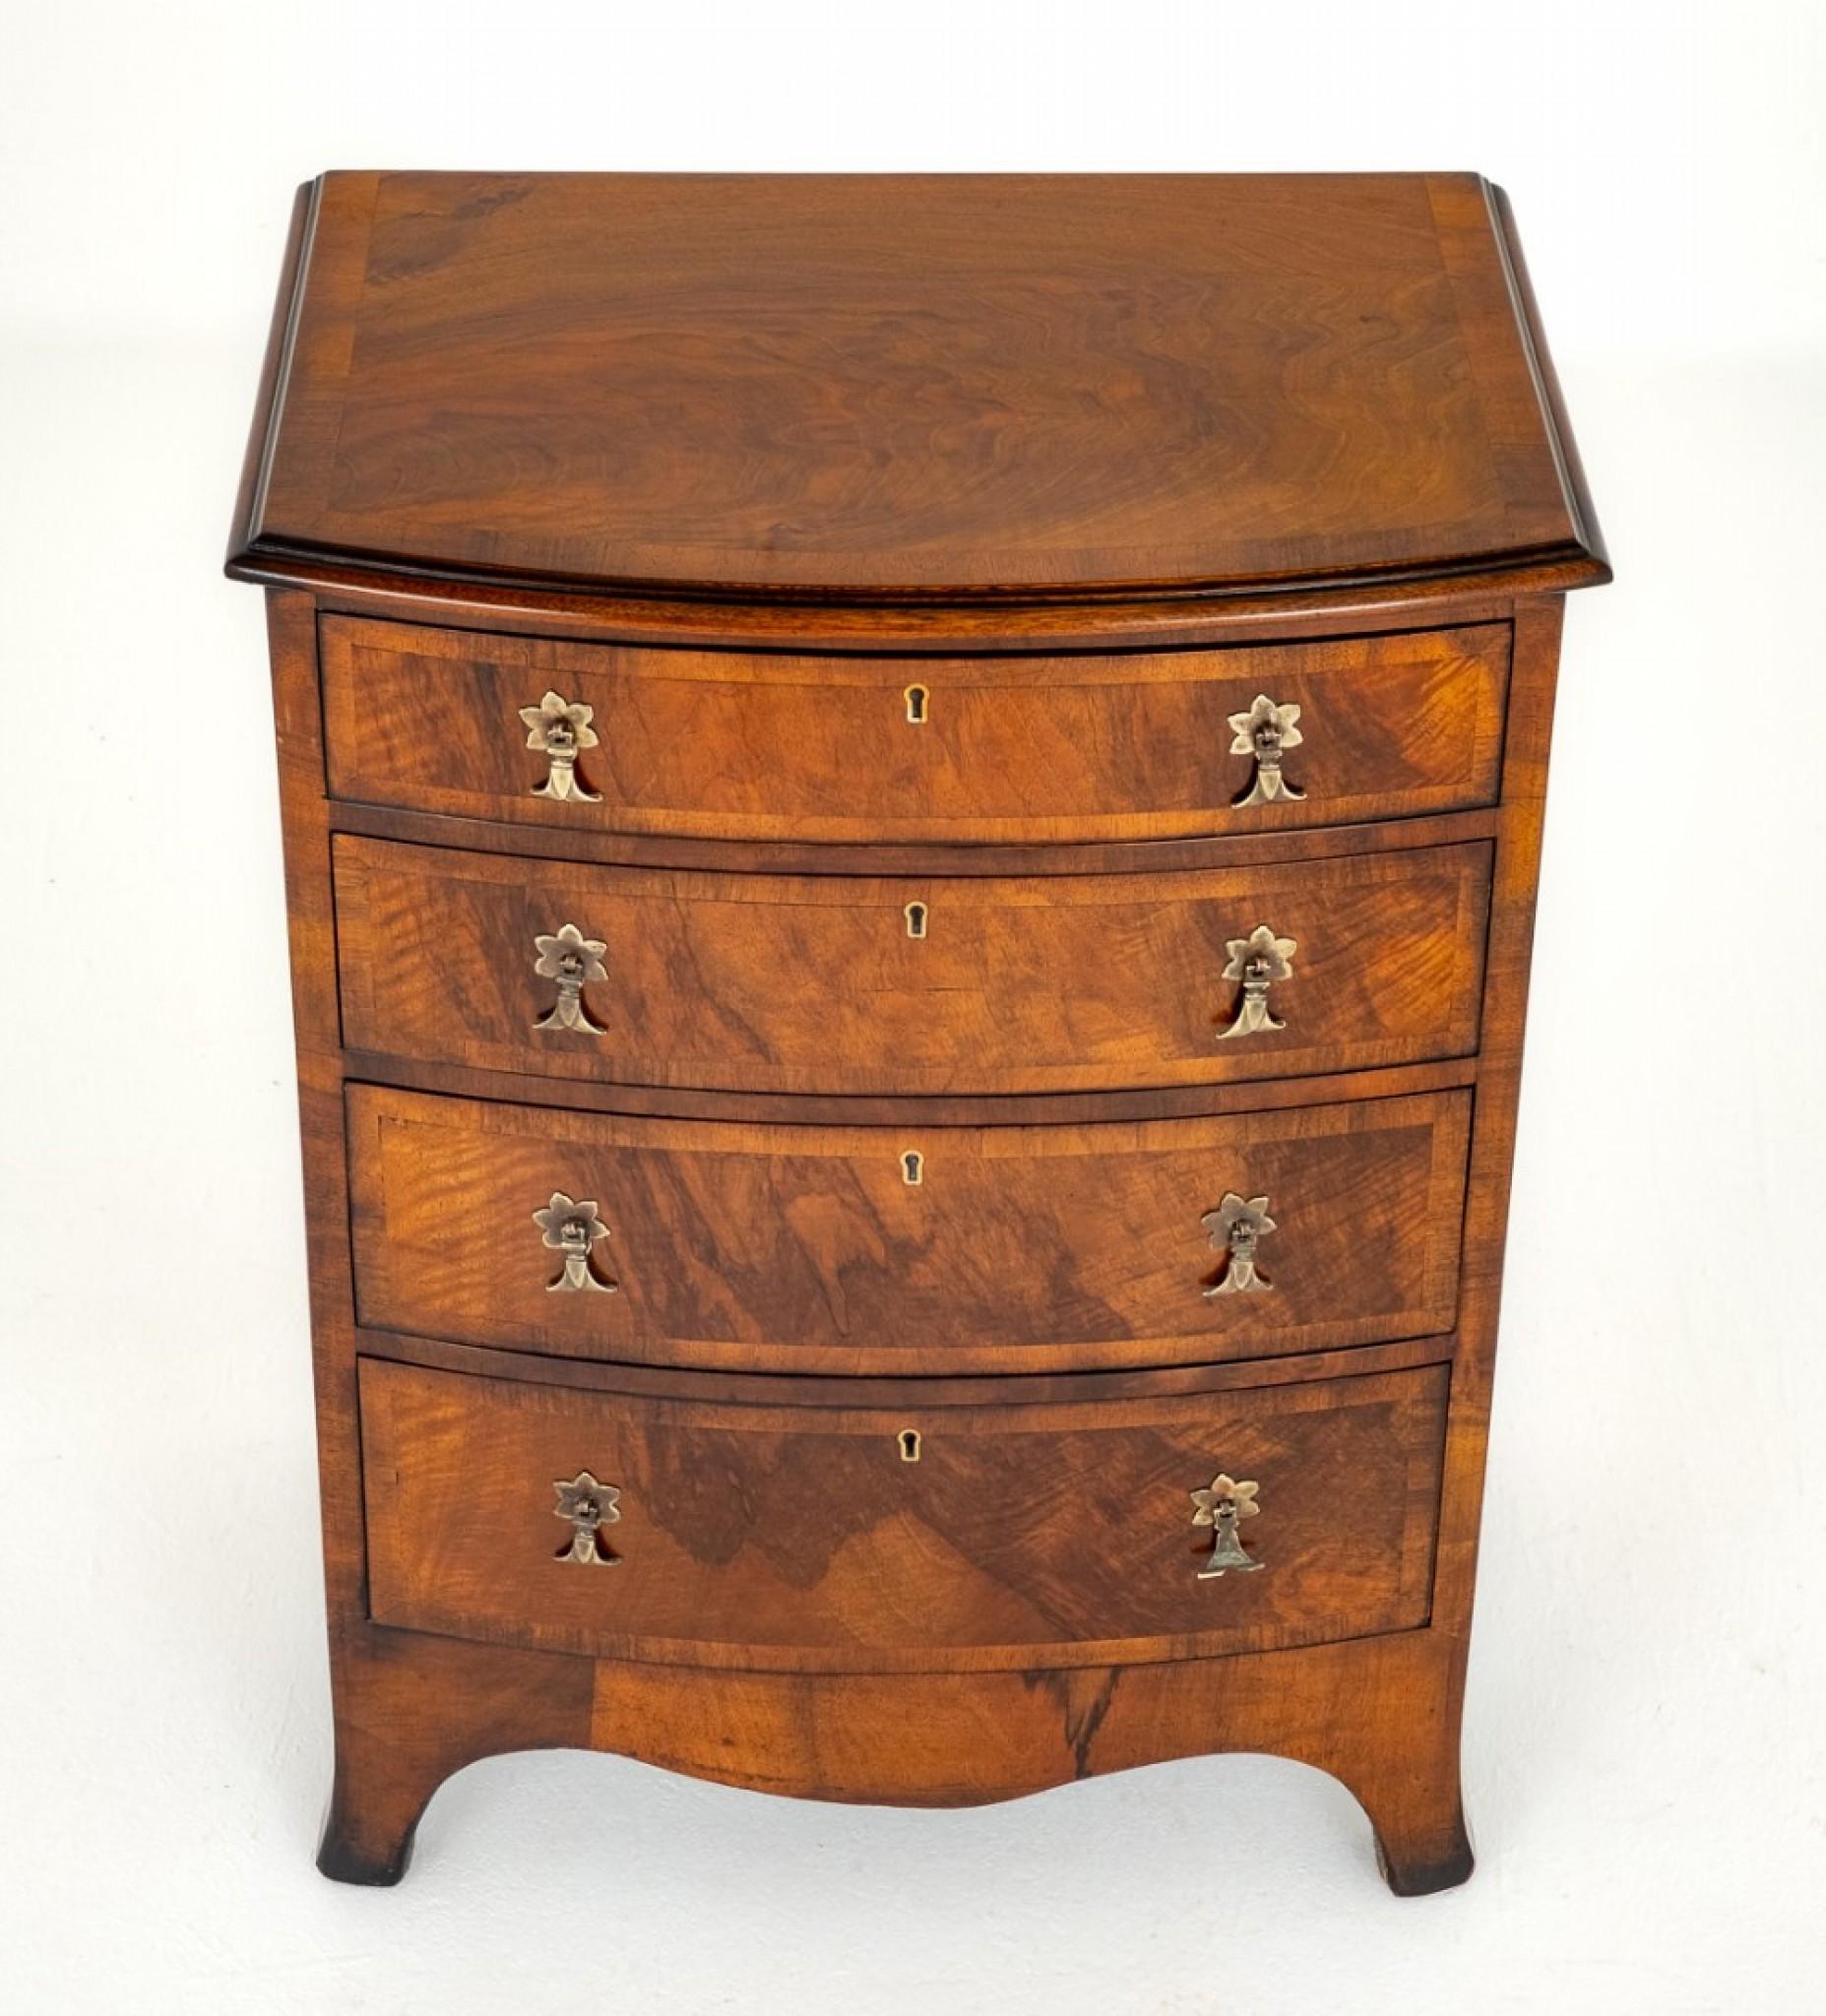 Walnut Regency style Bow Chest of Drawers.
This Pretty Chest of Drawers is Raised upon Splay Feet and Features a Shaped Frieze.
The Chest of Drawers Having 4 Mahogany Lined Graduated Drawers Which Retain Their Original Brass Drop Handles.
Circa